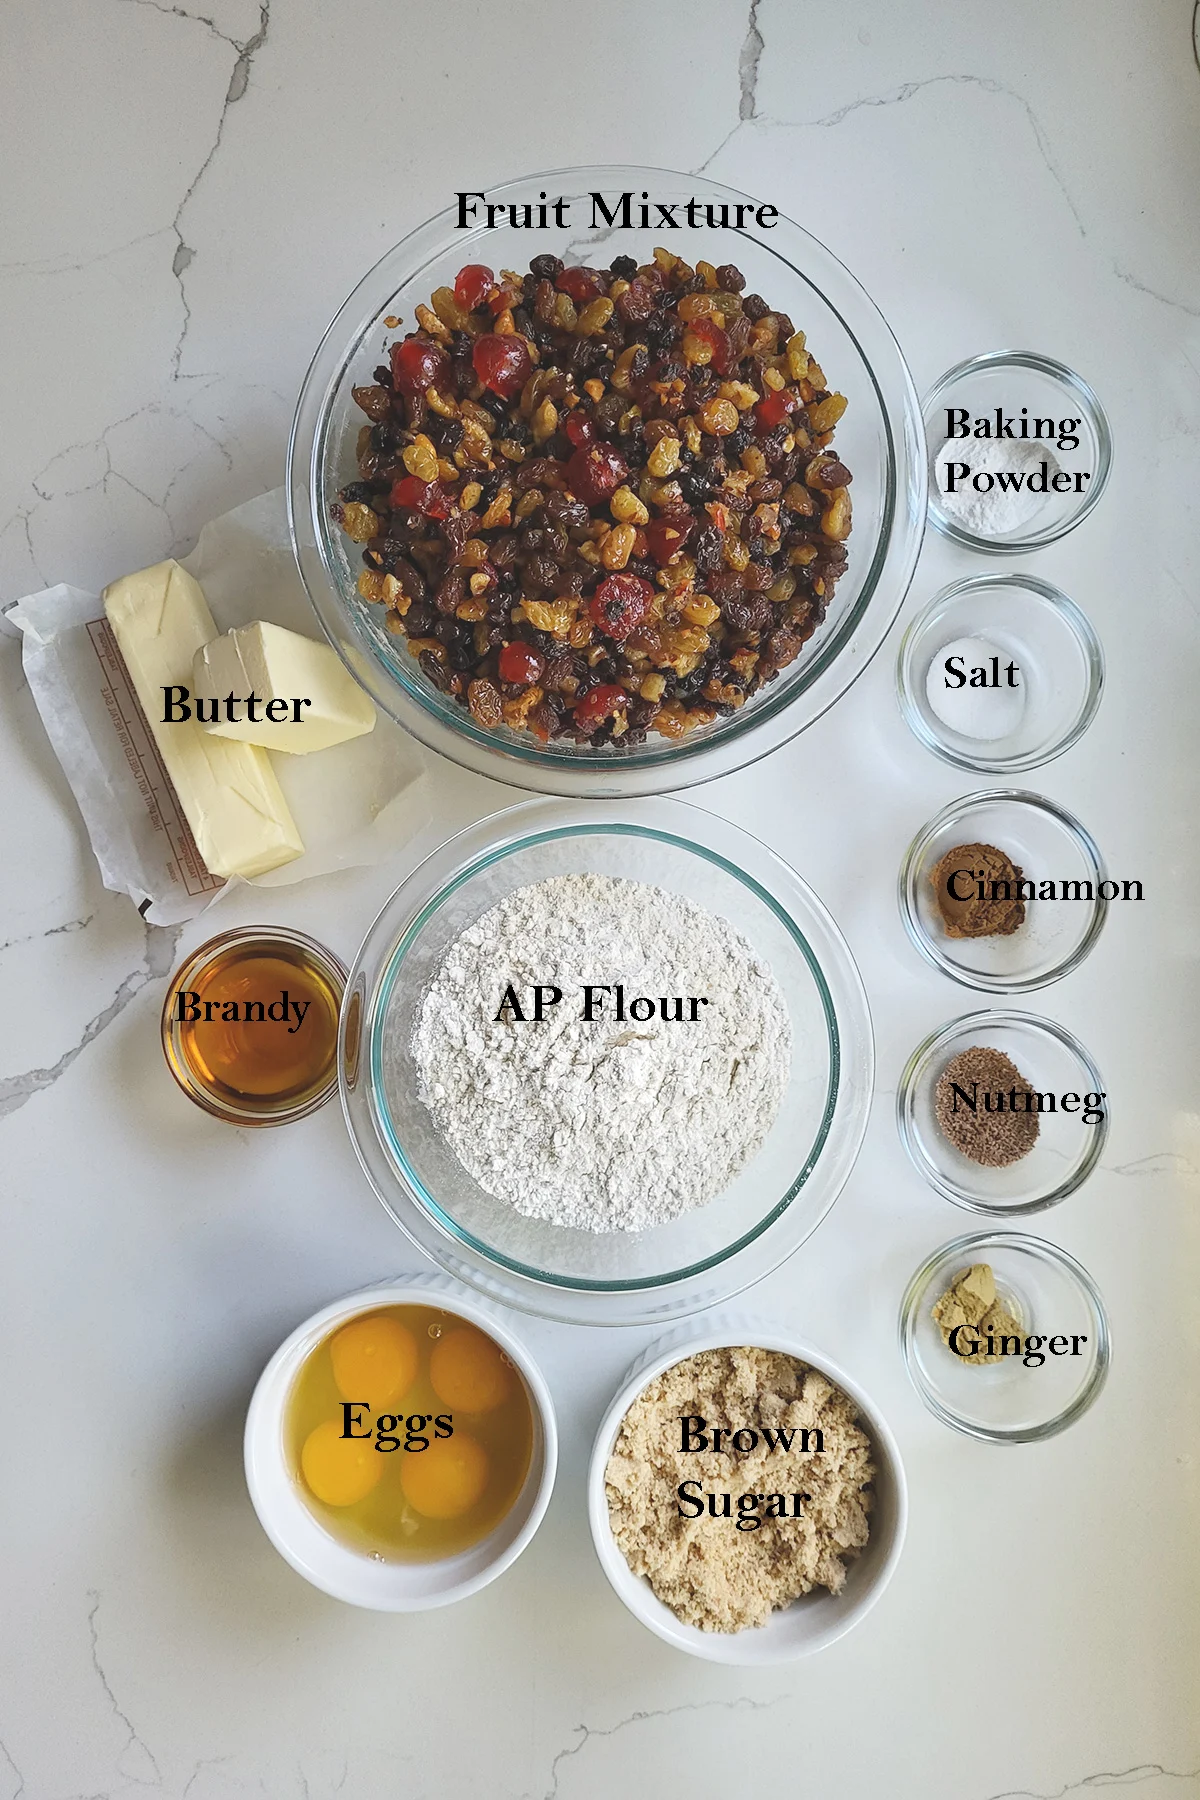 butter, sugar, flour, eggs, fruit and spices for making aged fruitcake